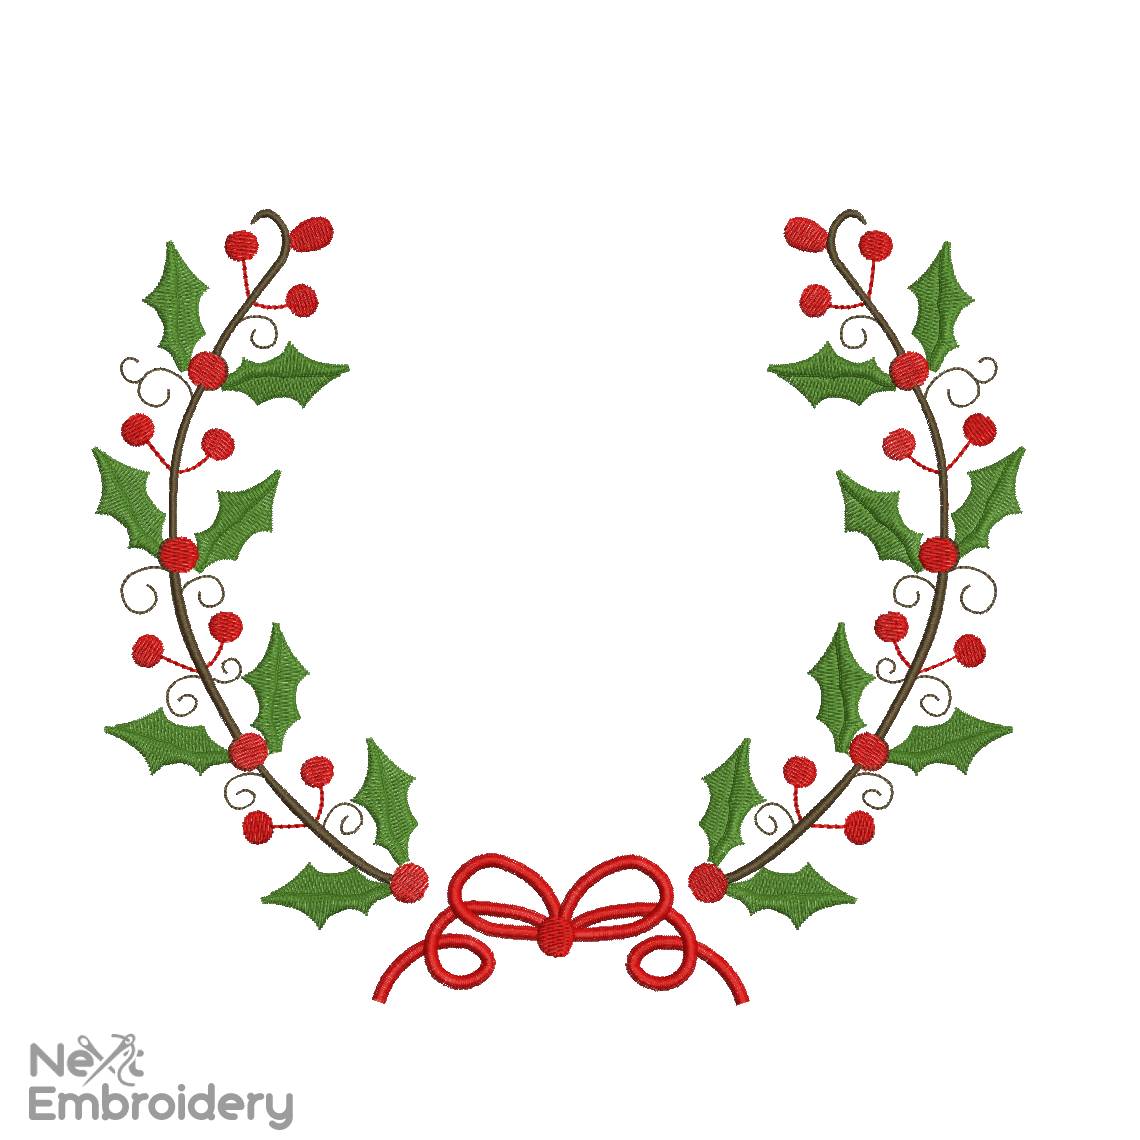 Christmas Wreath Embroidery Design, Merry Christmas Ornaments Embroidery Design, Holiday Decor Machine Embroidery Files